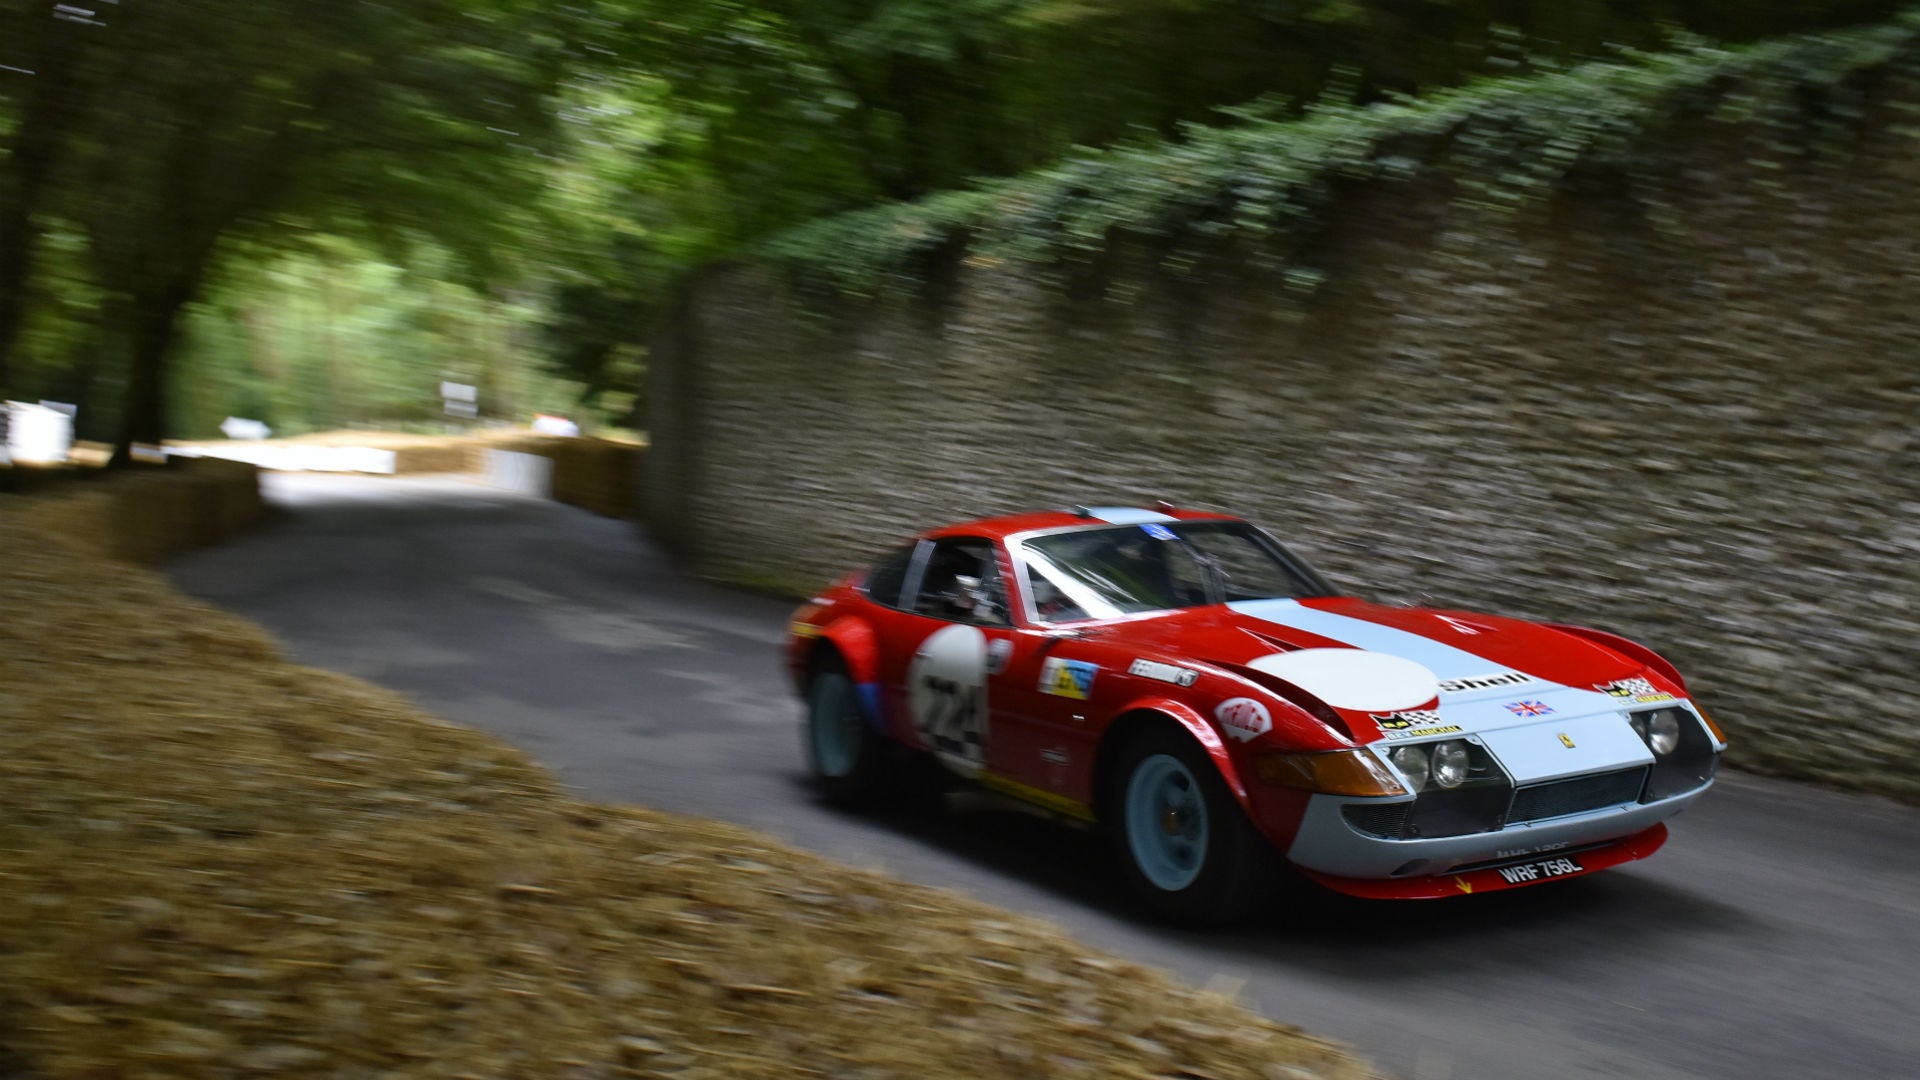 The Guide to the 2018 Goodwood Festival of Speed Hillclimb